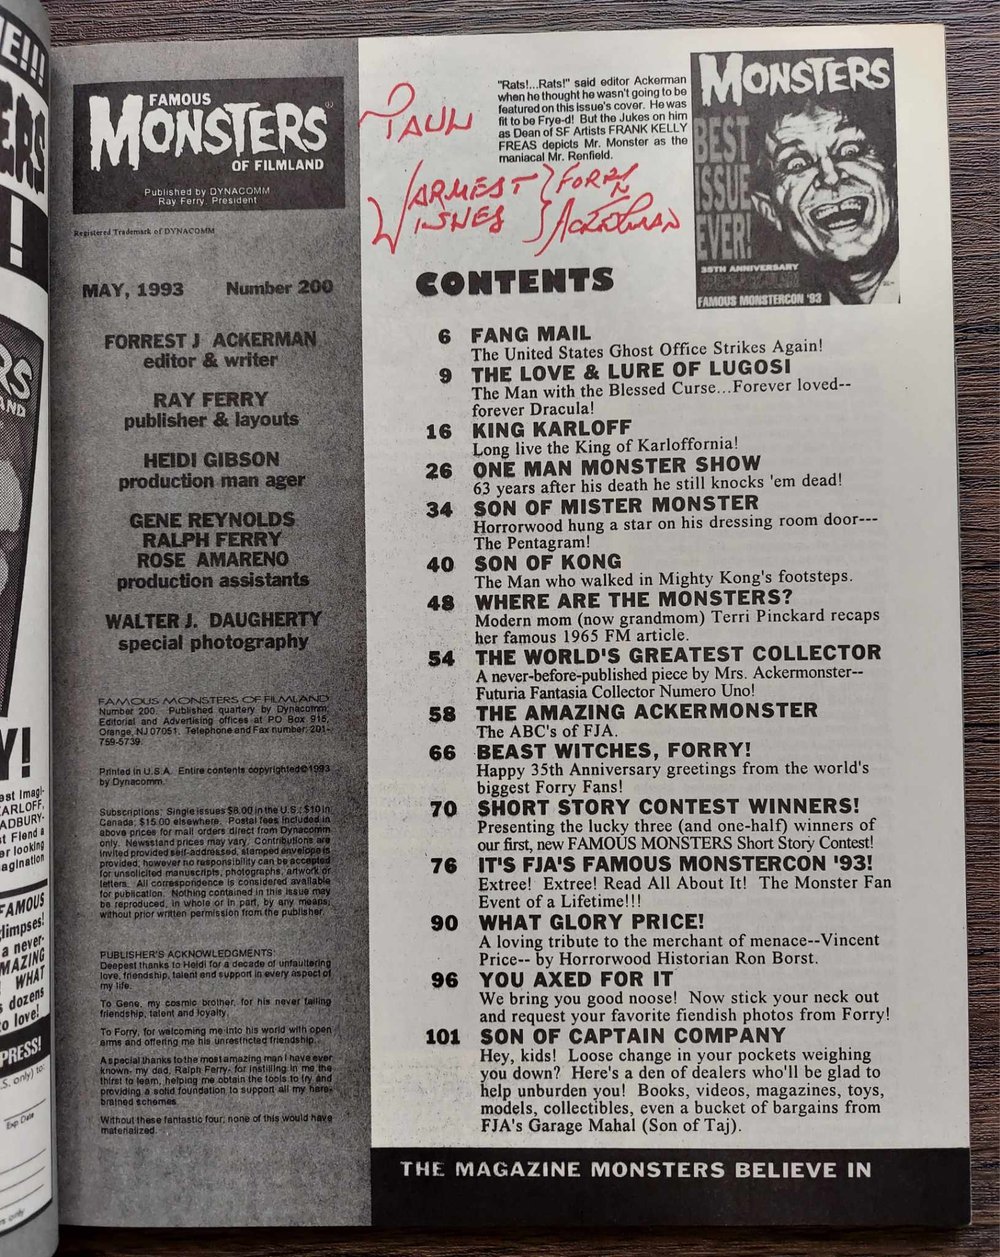 Famous Monsters of Filmland No. 200 - SIGNED by Forrest Ackerman x2